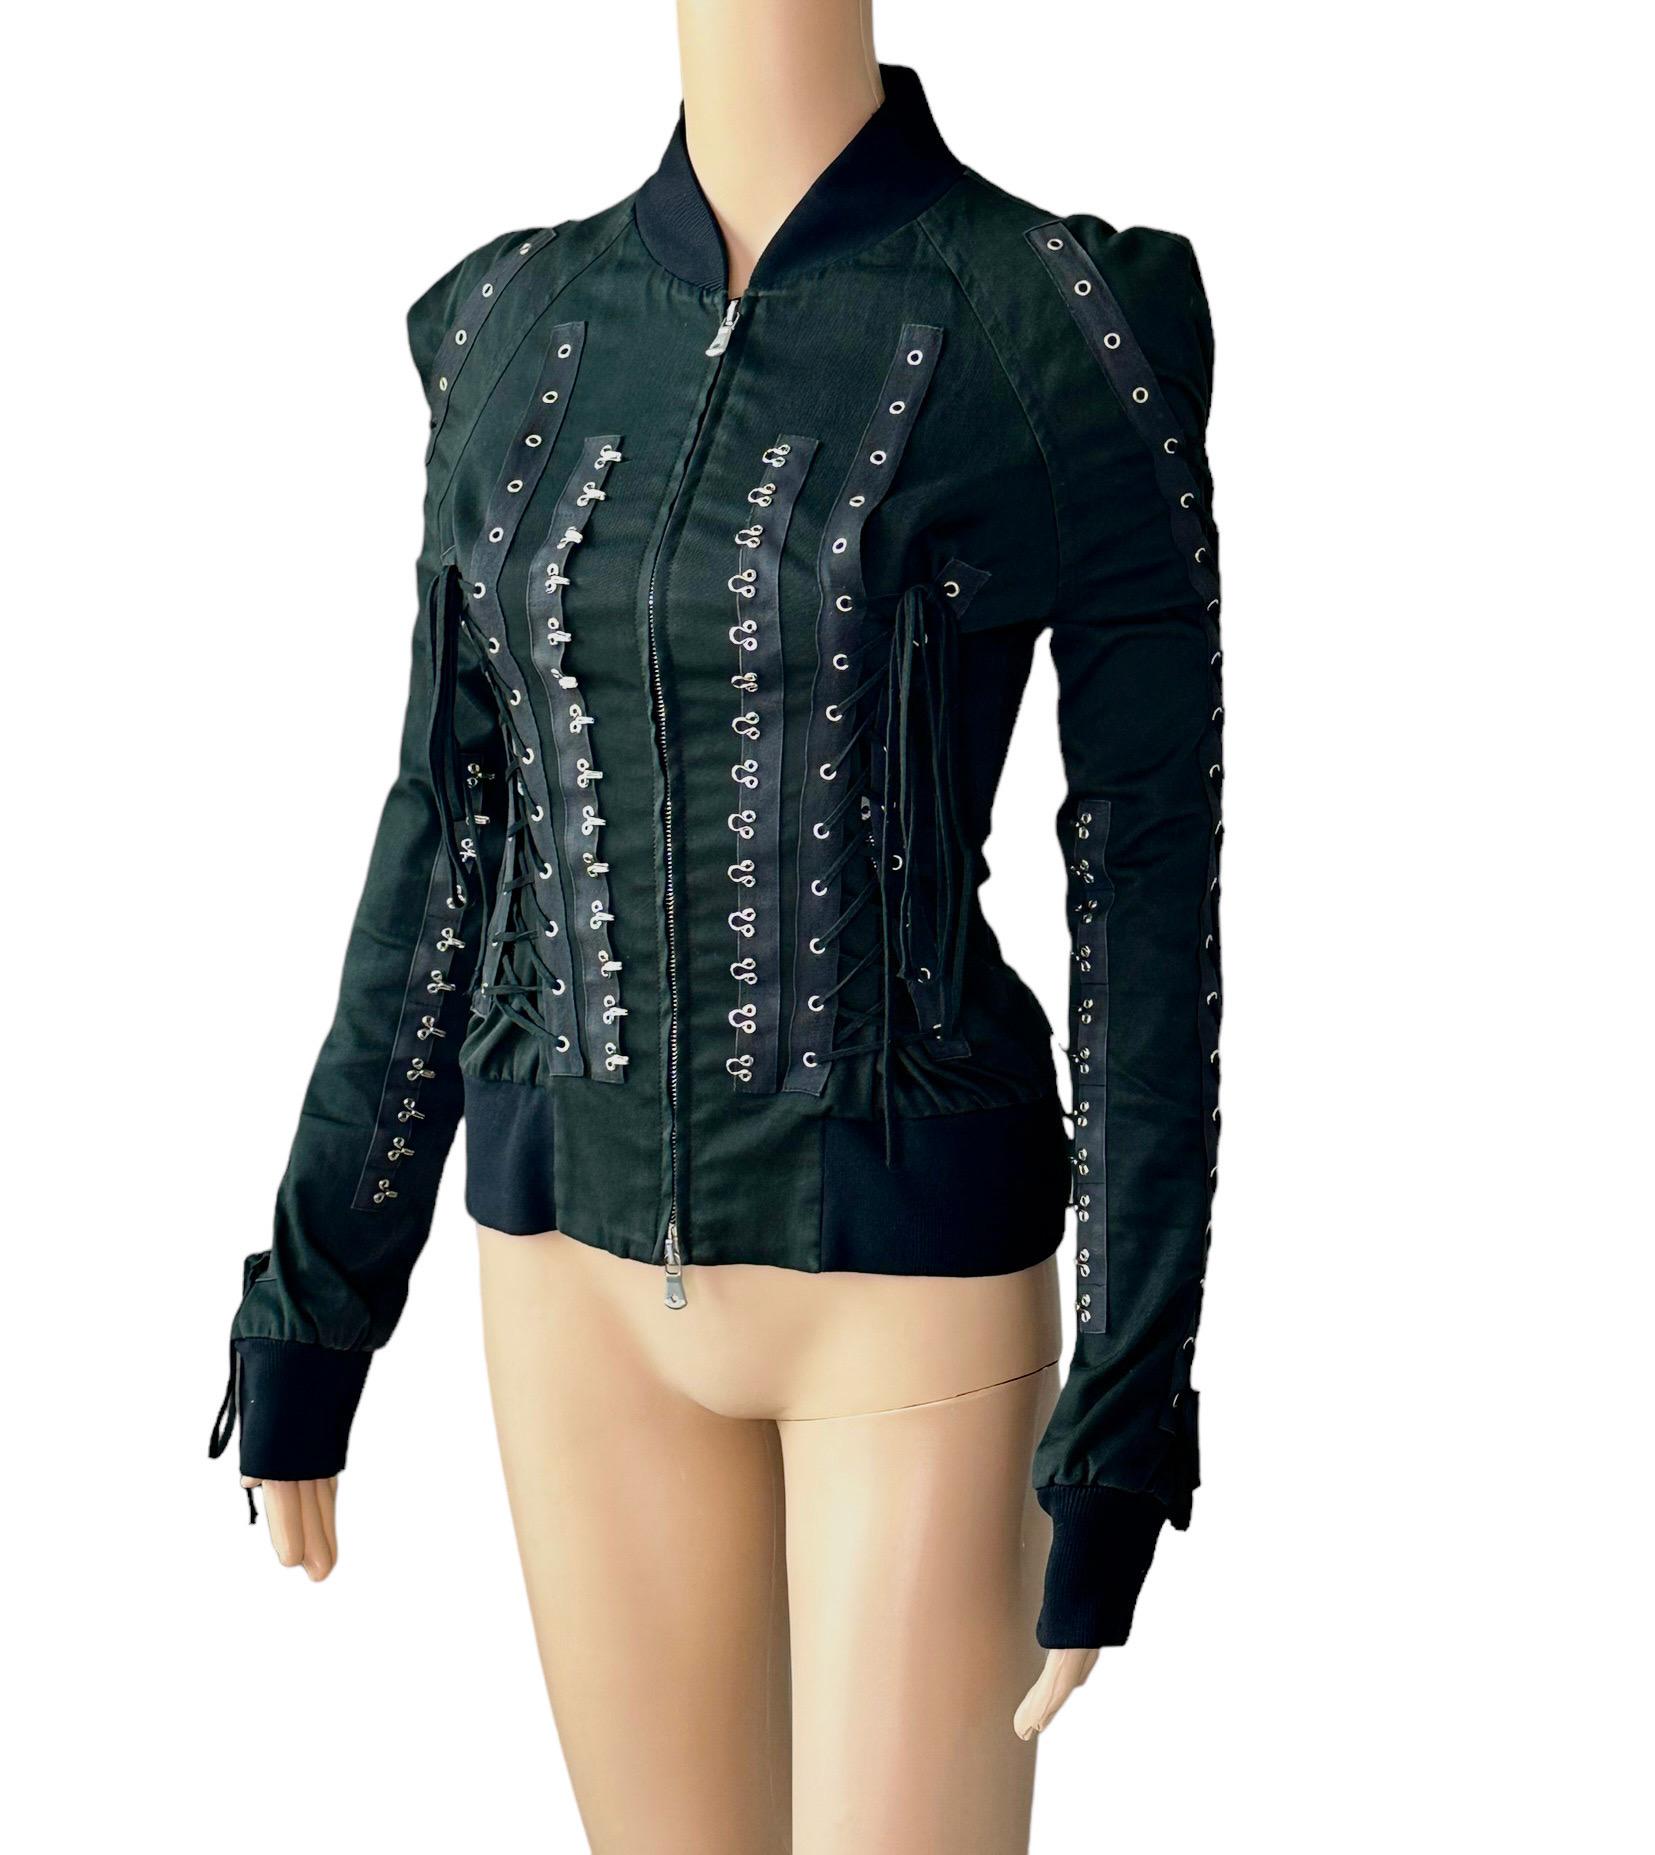 Dolce & Gabbana F/W 2003 Corset Lace Up Hook and Eye Black Top Jacket For Sale 1